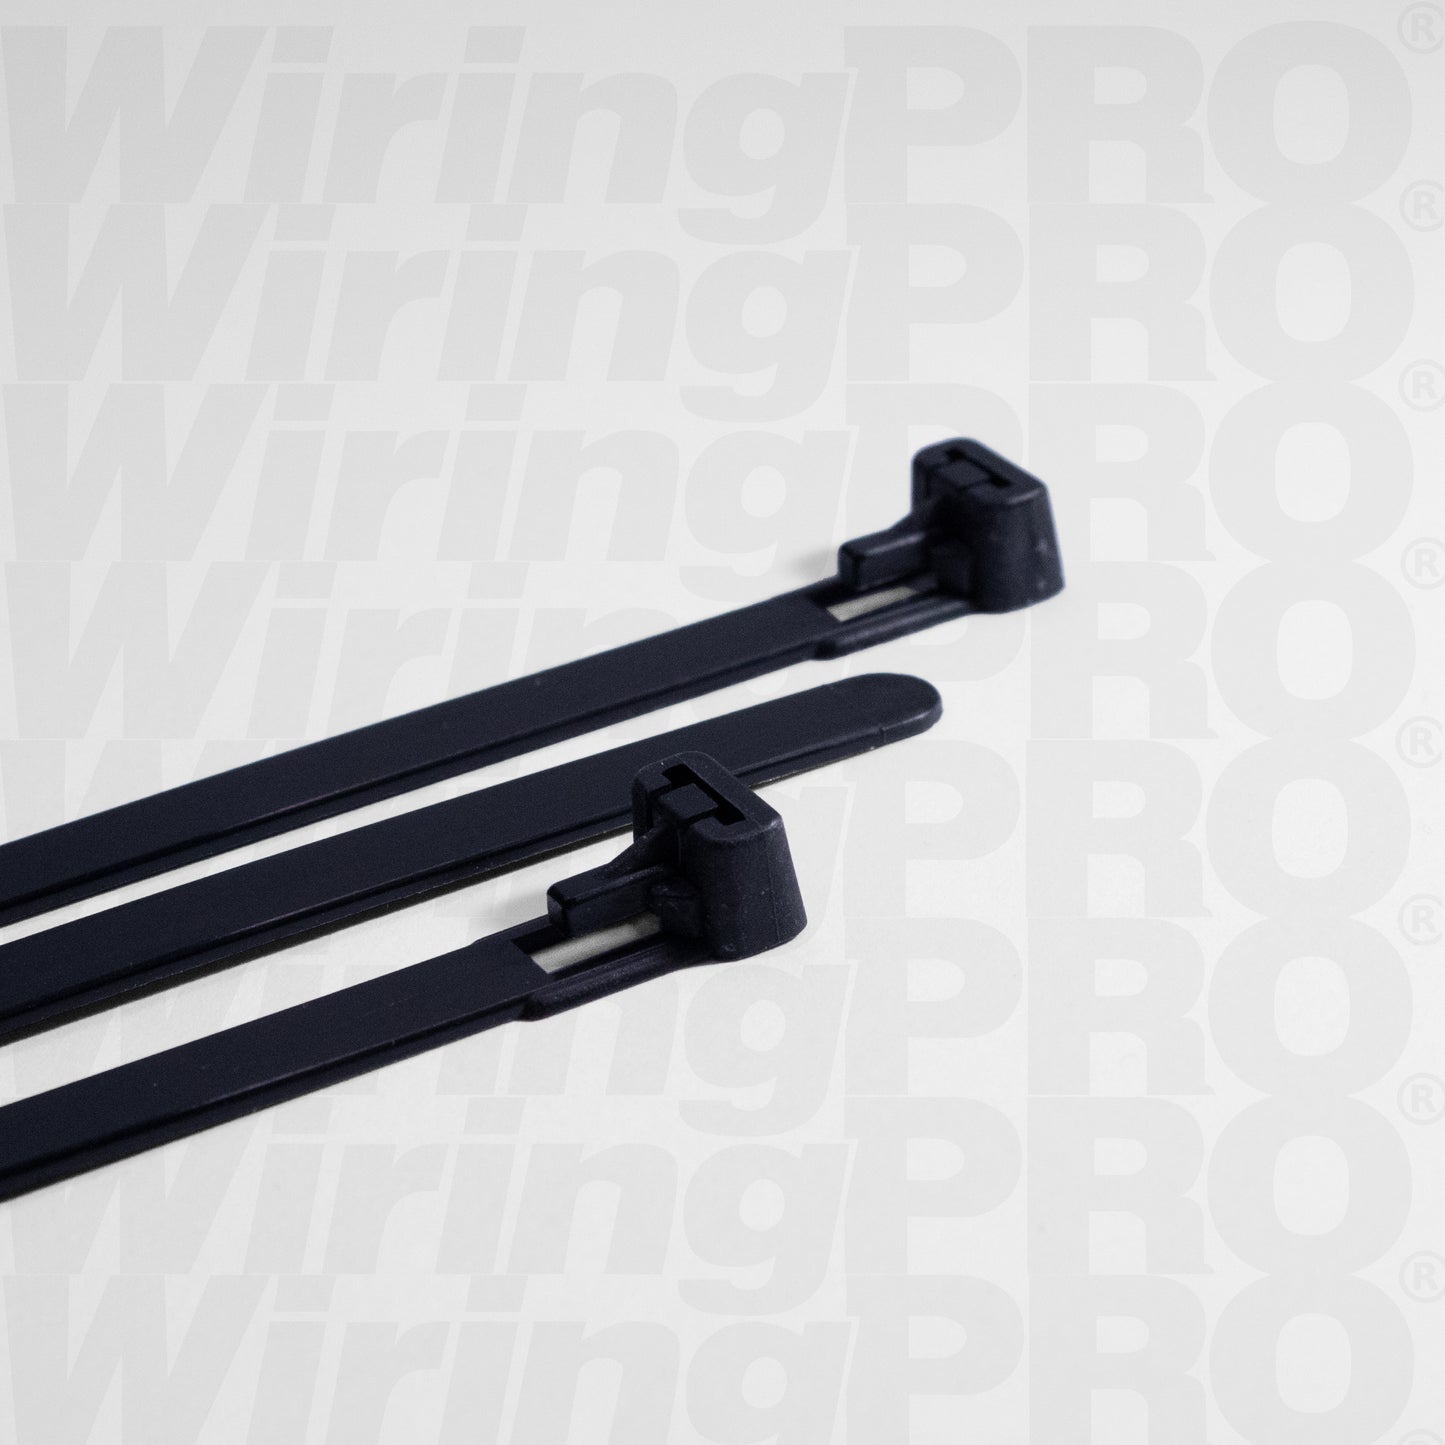 Releasable Cable Ties - Black Nylon